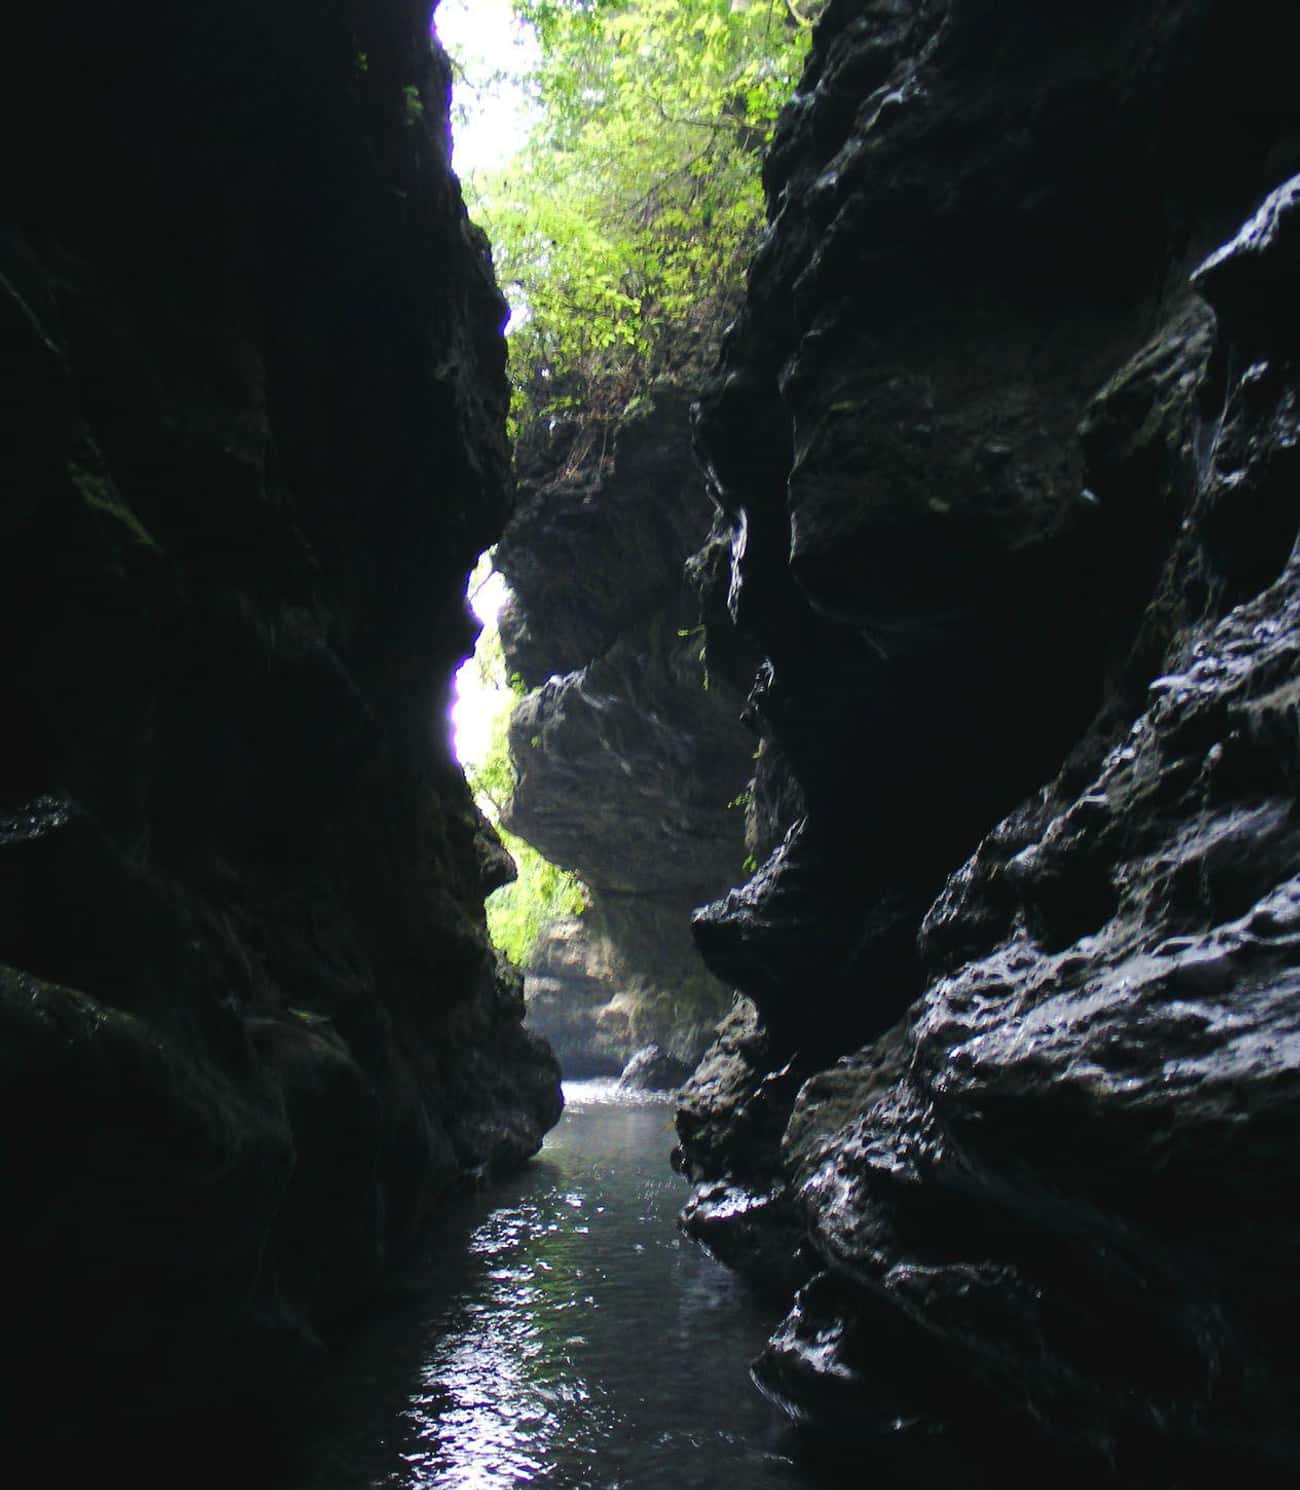 Robber’s Cave